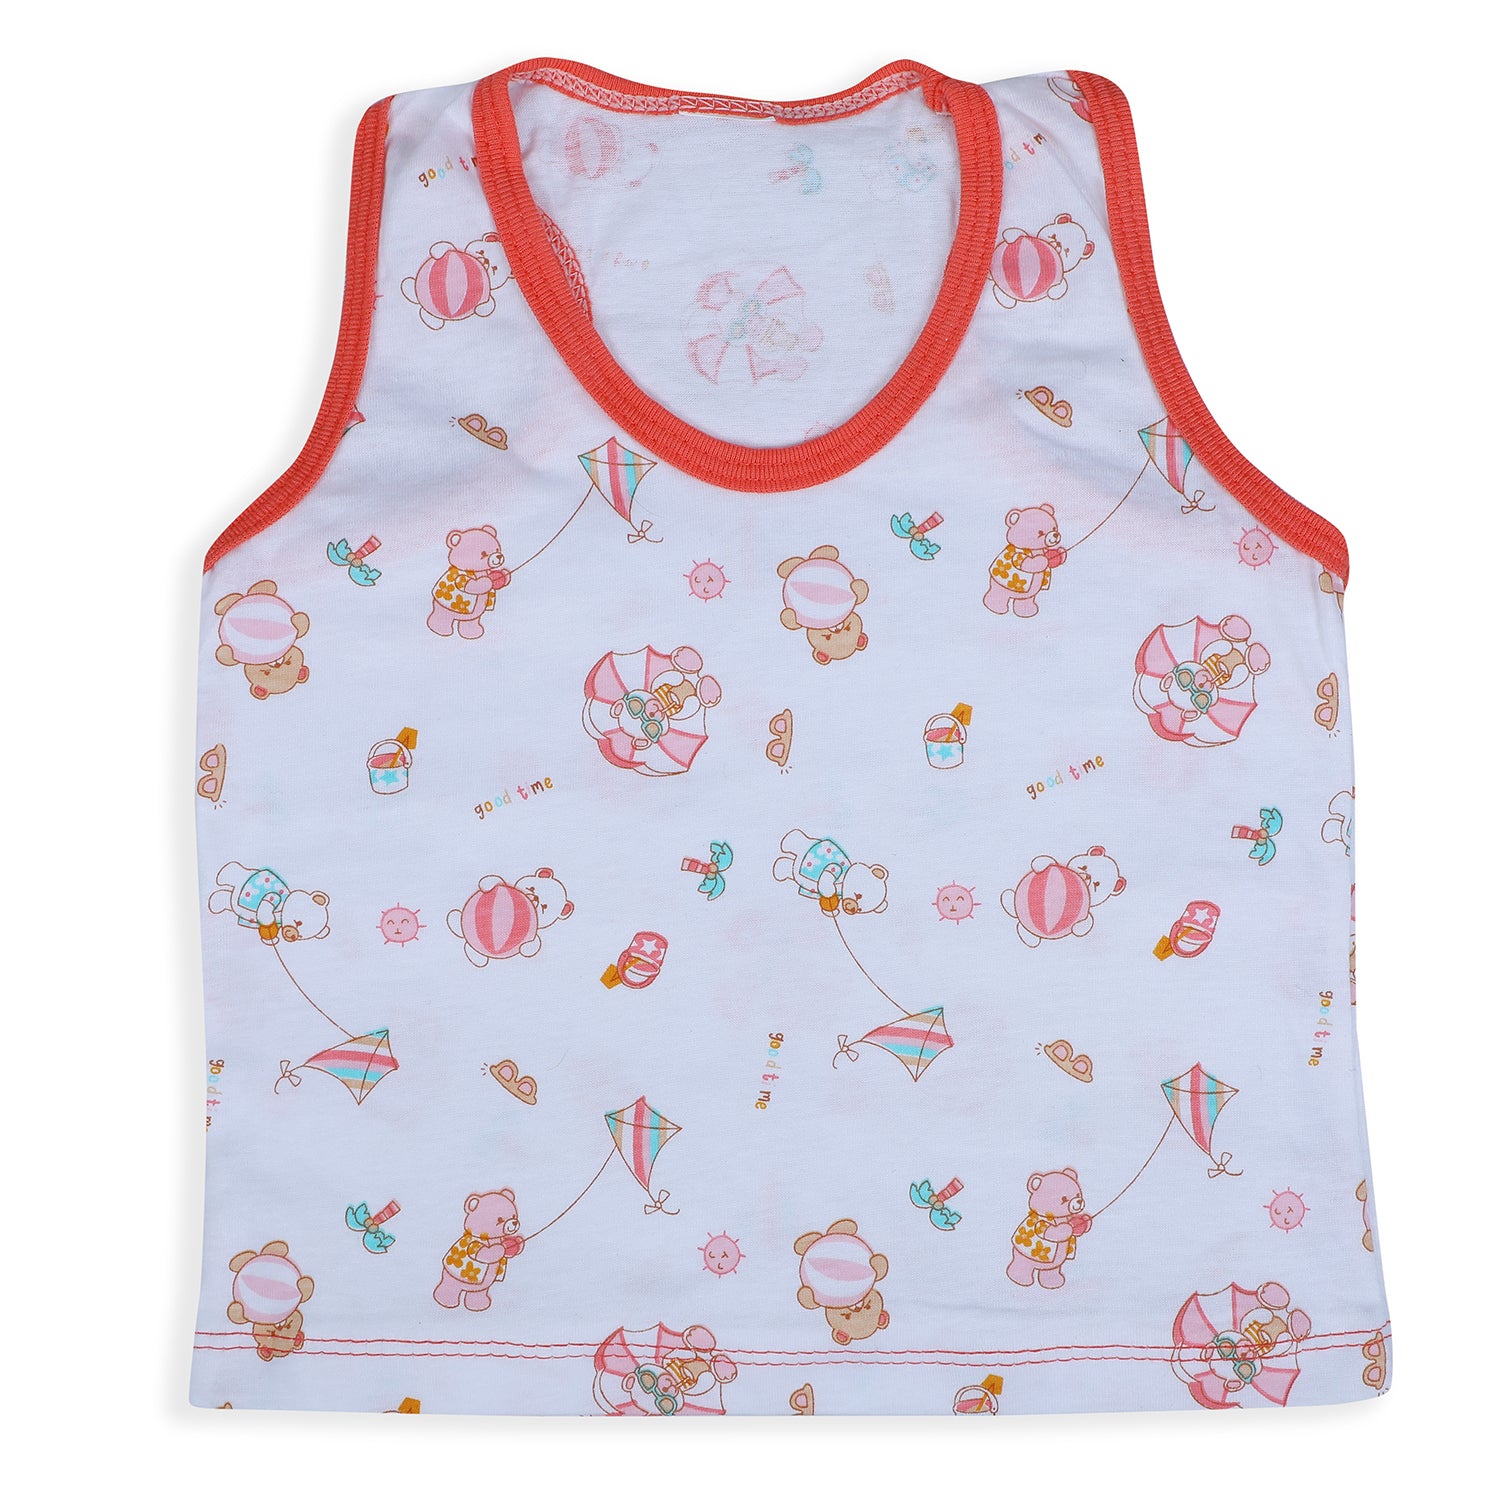 Baby Moo Kite Flying Bear Pure Cotton Sleeveless Vest With Matching Bottom 2pcs Set - Red - Baby Moo